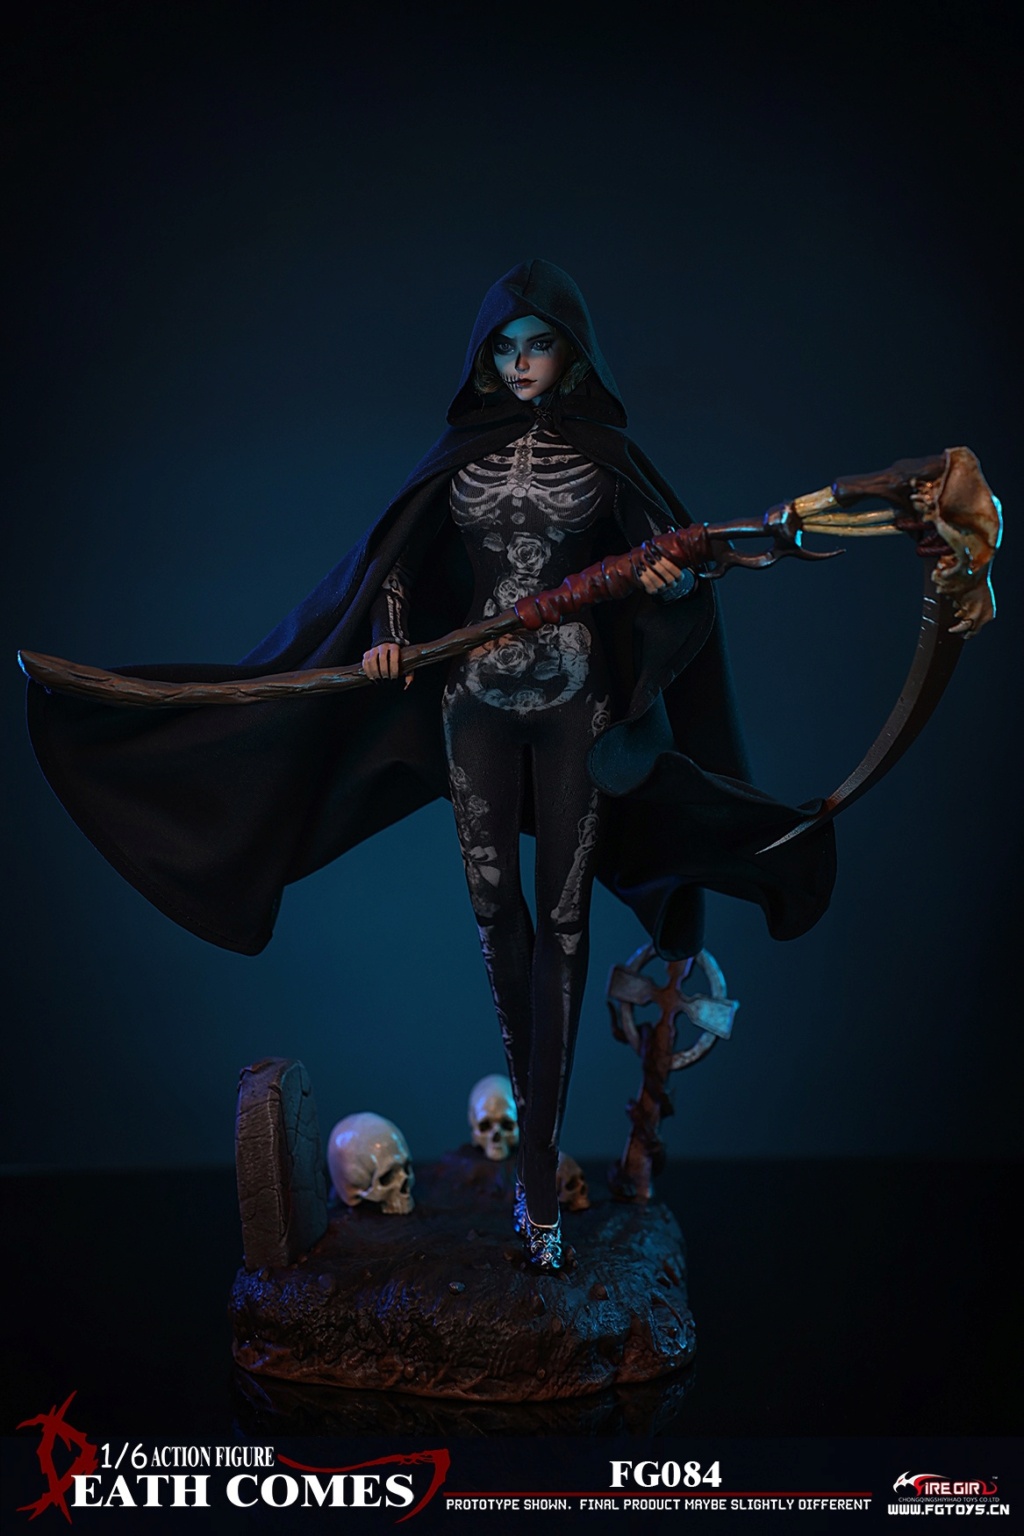 DeathComes - NEW PRODUCT: Fire Girl Toys: 1/6 Death Comes #FG084 female 18101013